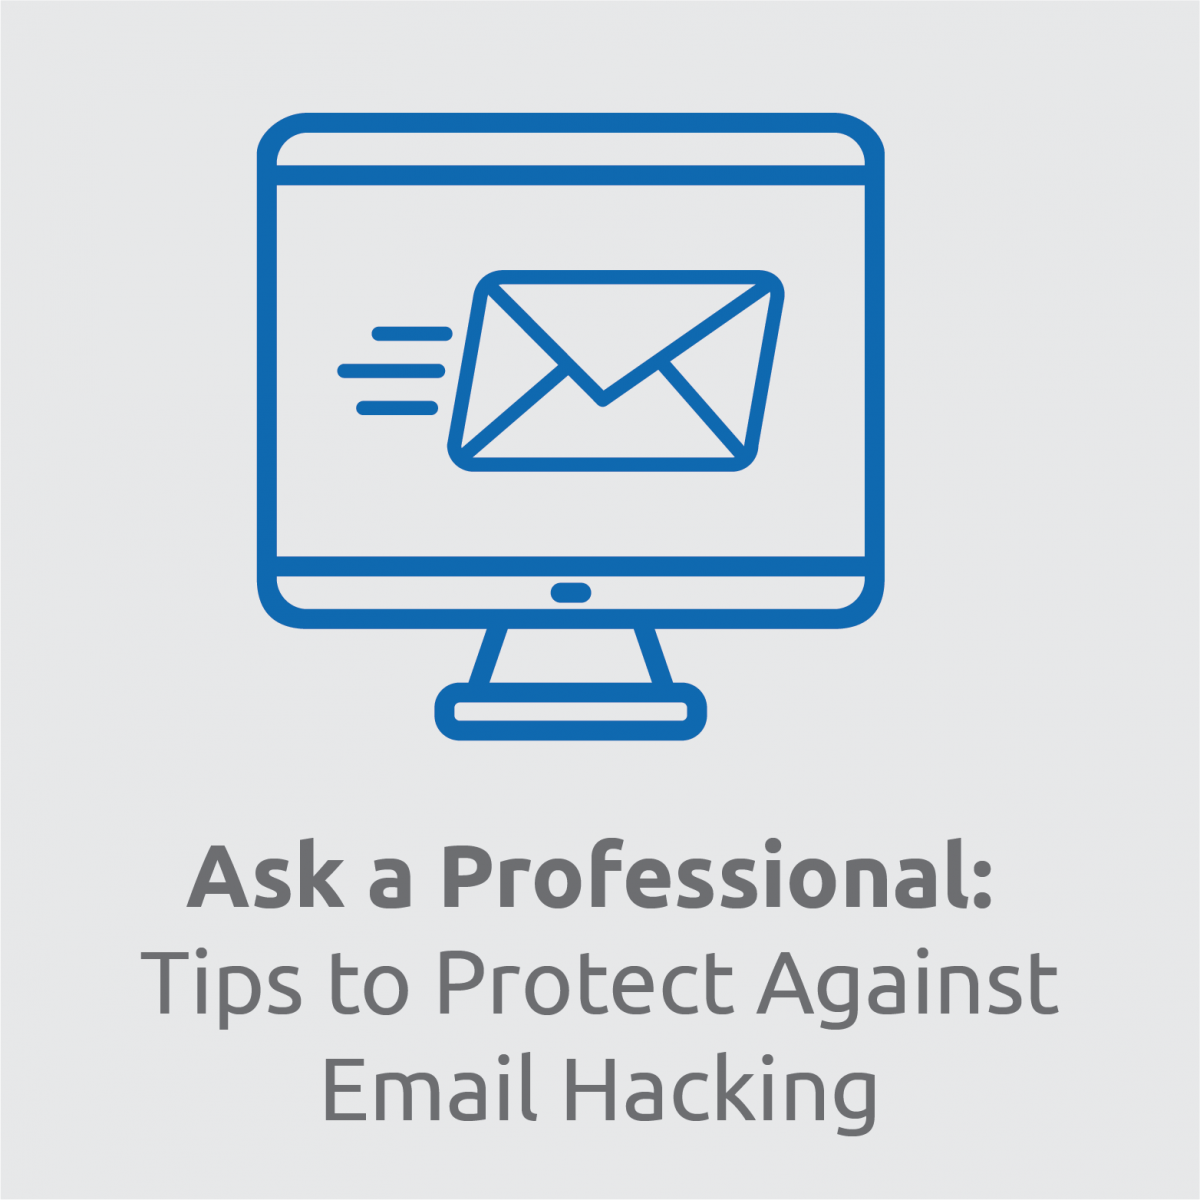 Tips to Protect Against Email Hacking